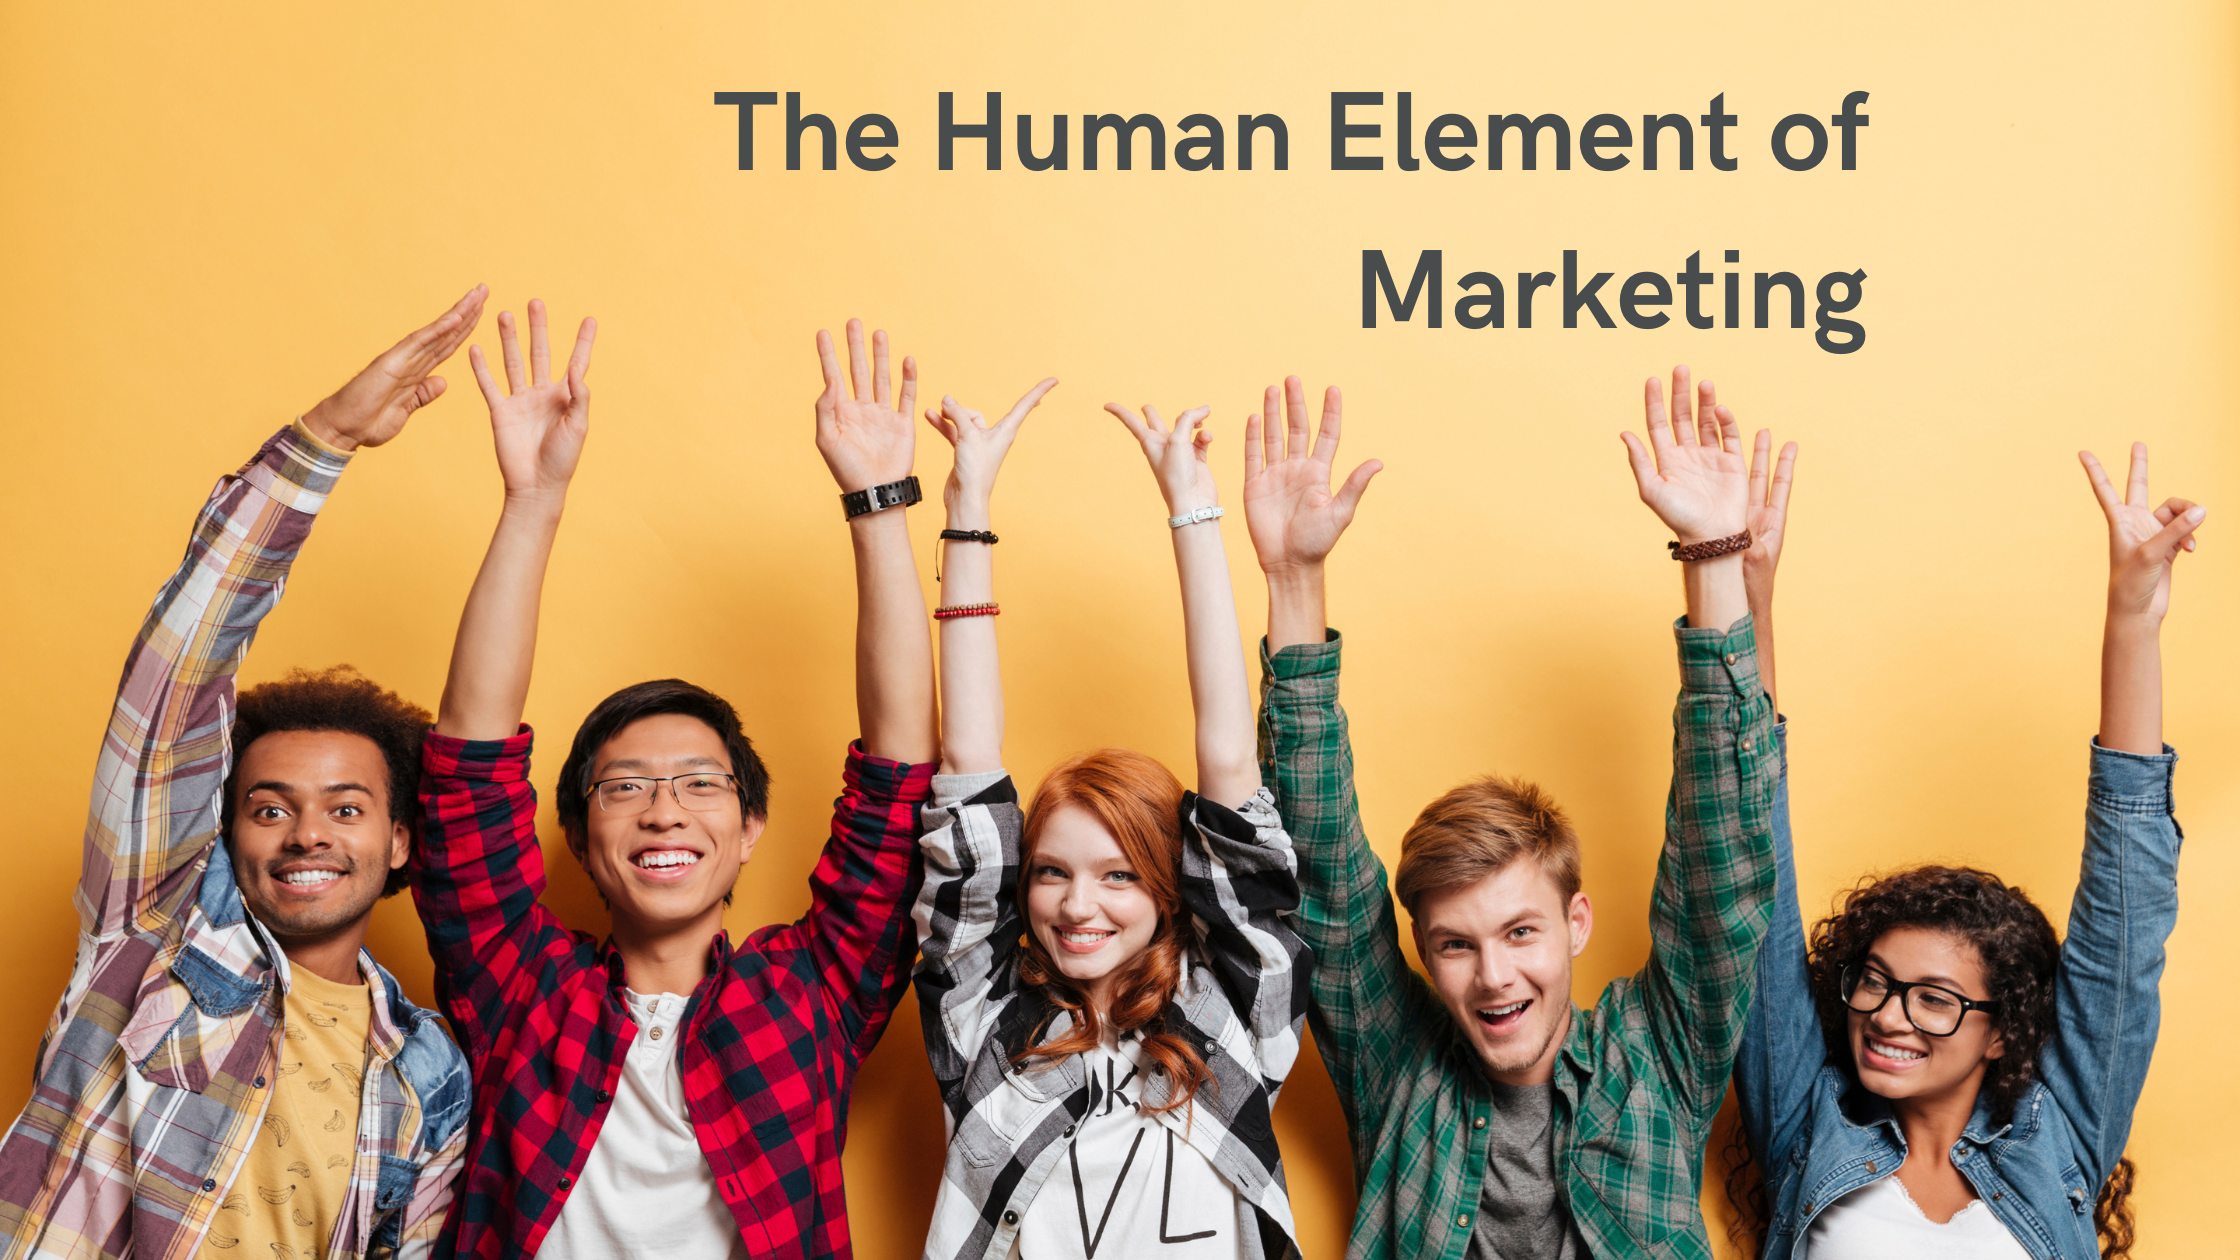 The Human Element of Marketing